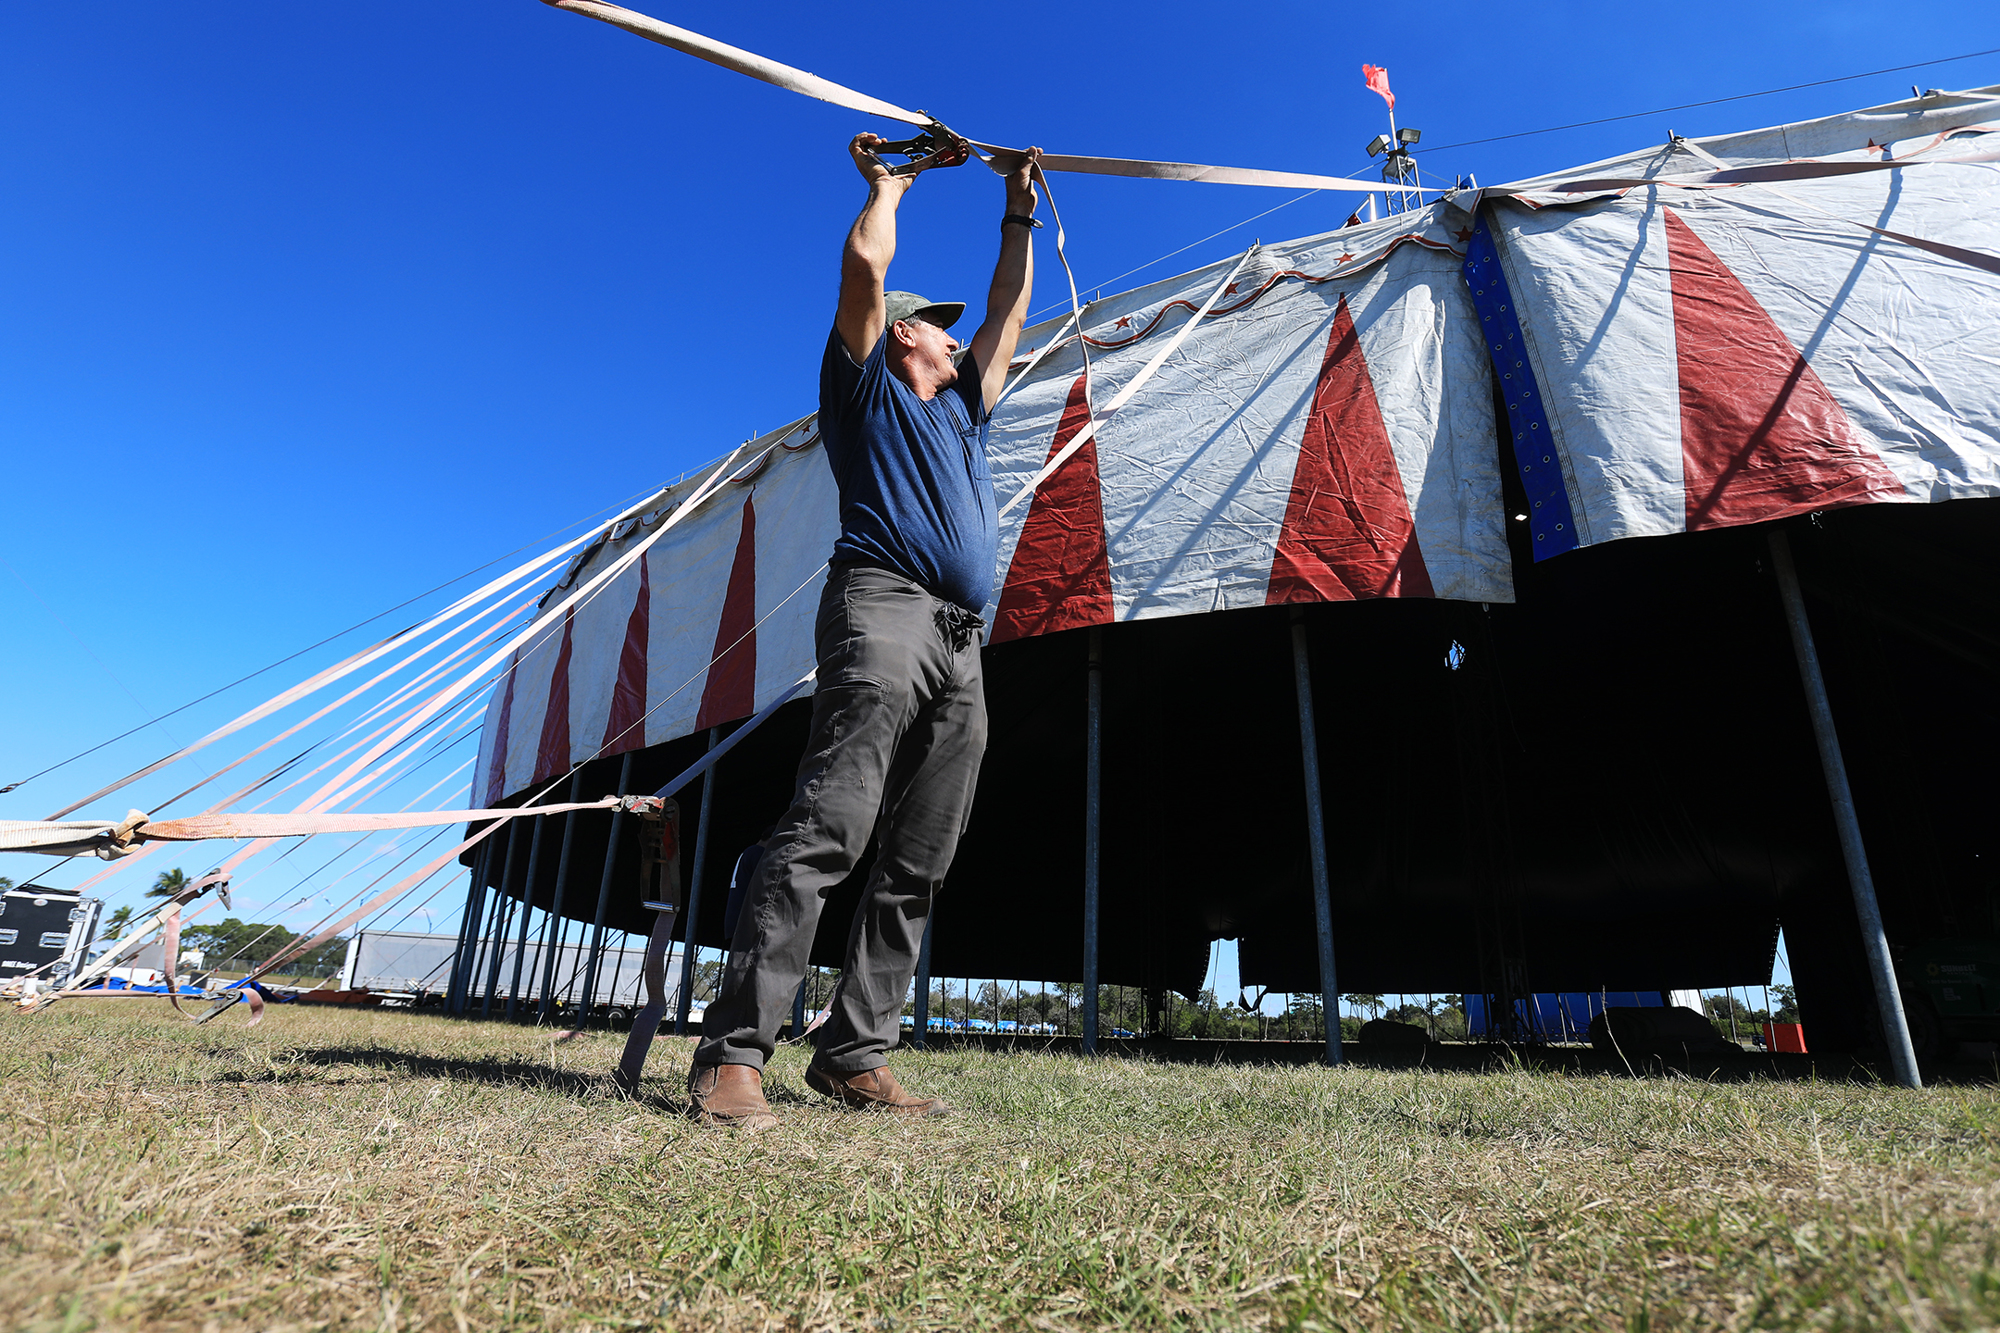 Luis Garcia works on the outside of the tent. (Photo: Harry Sayer)